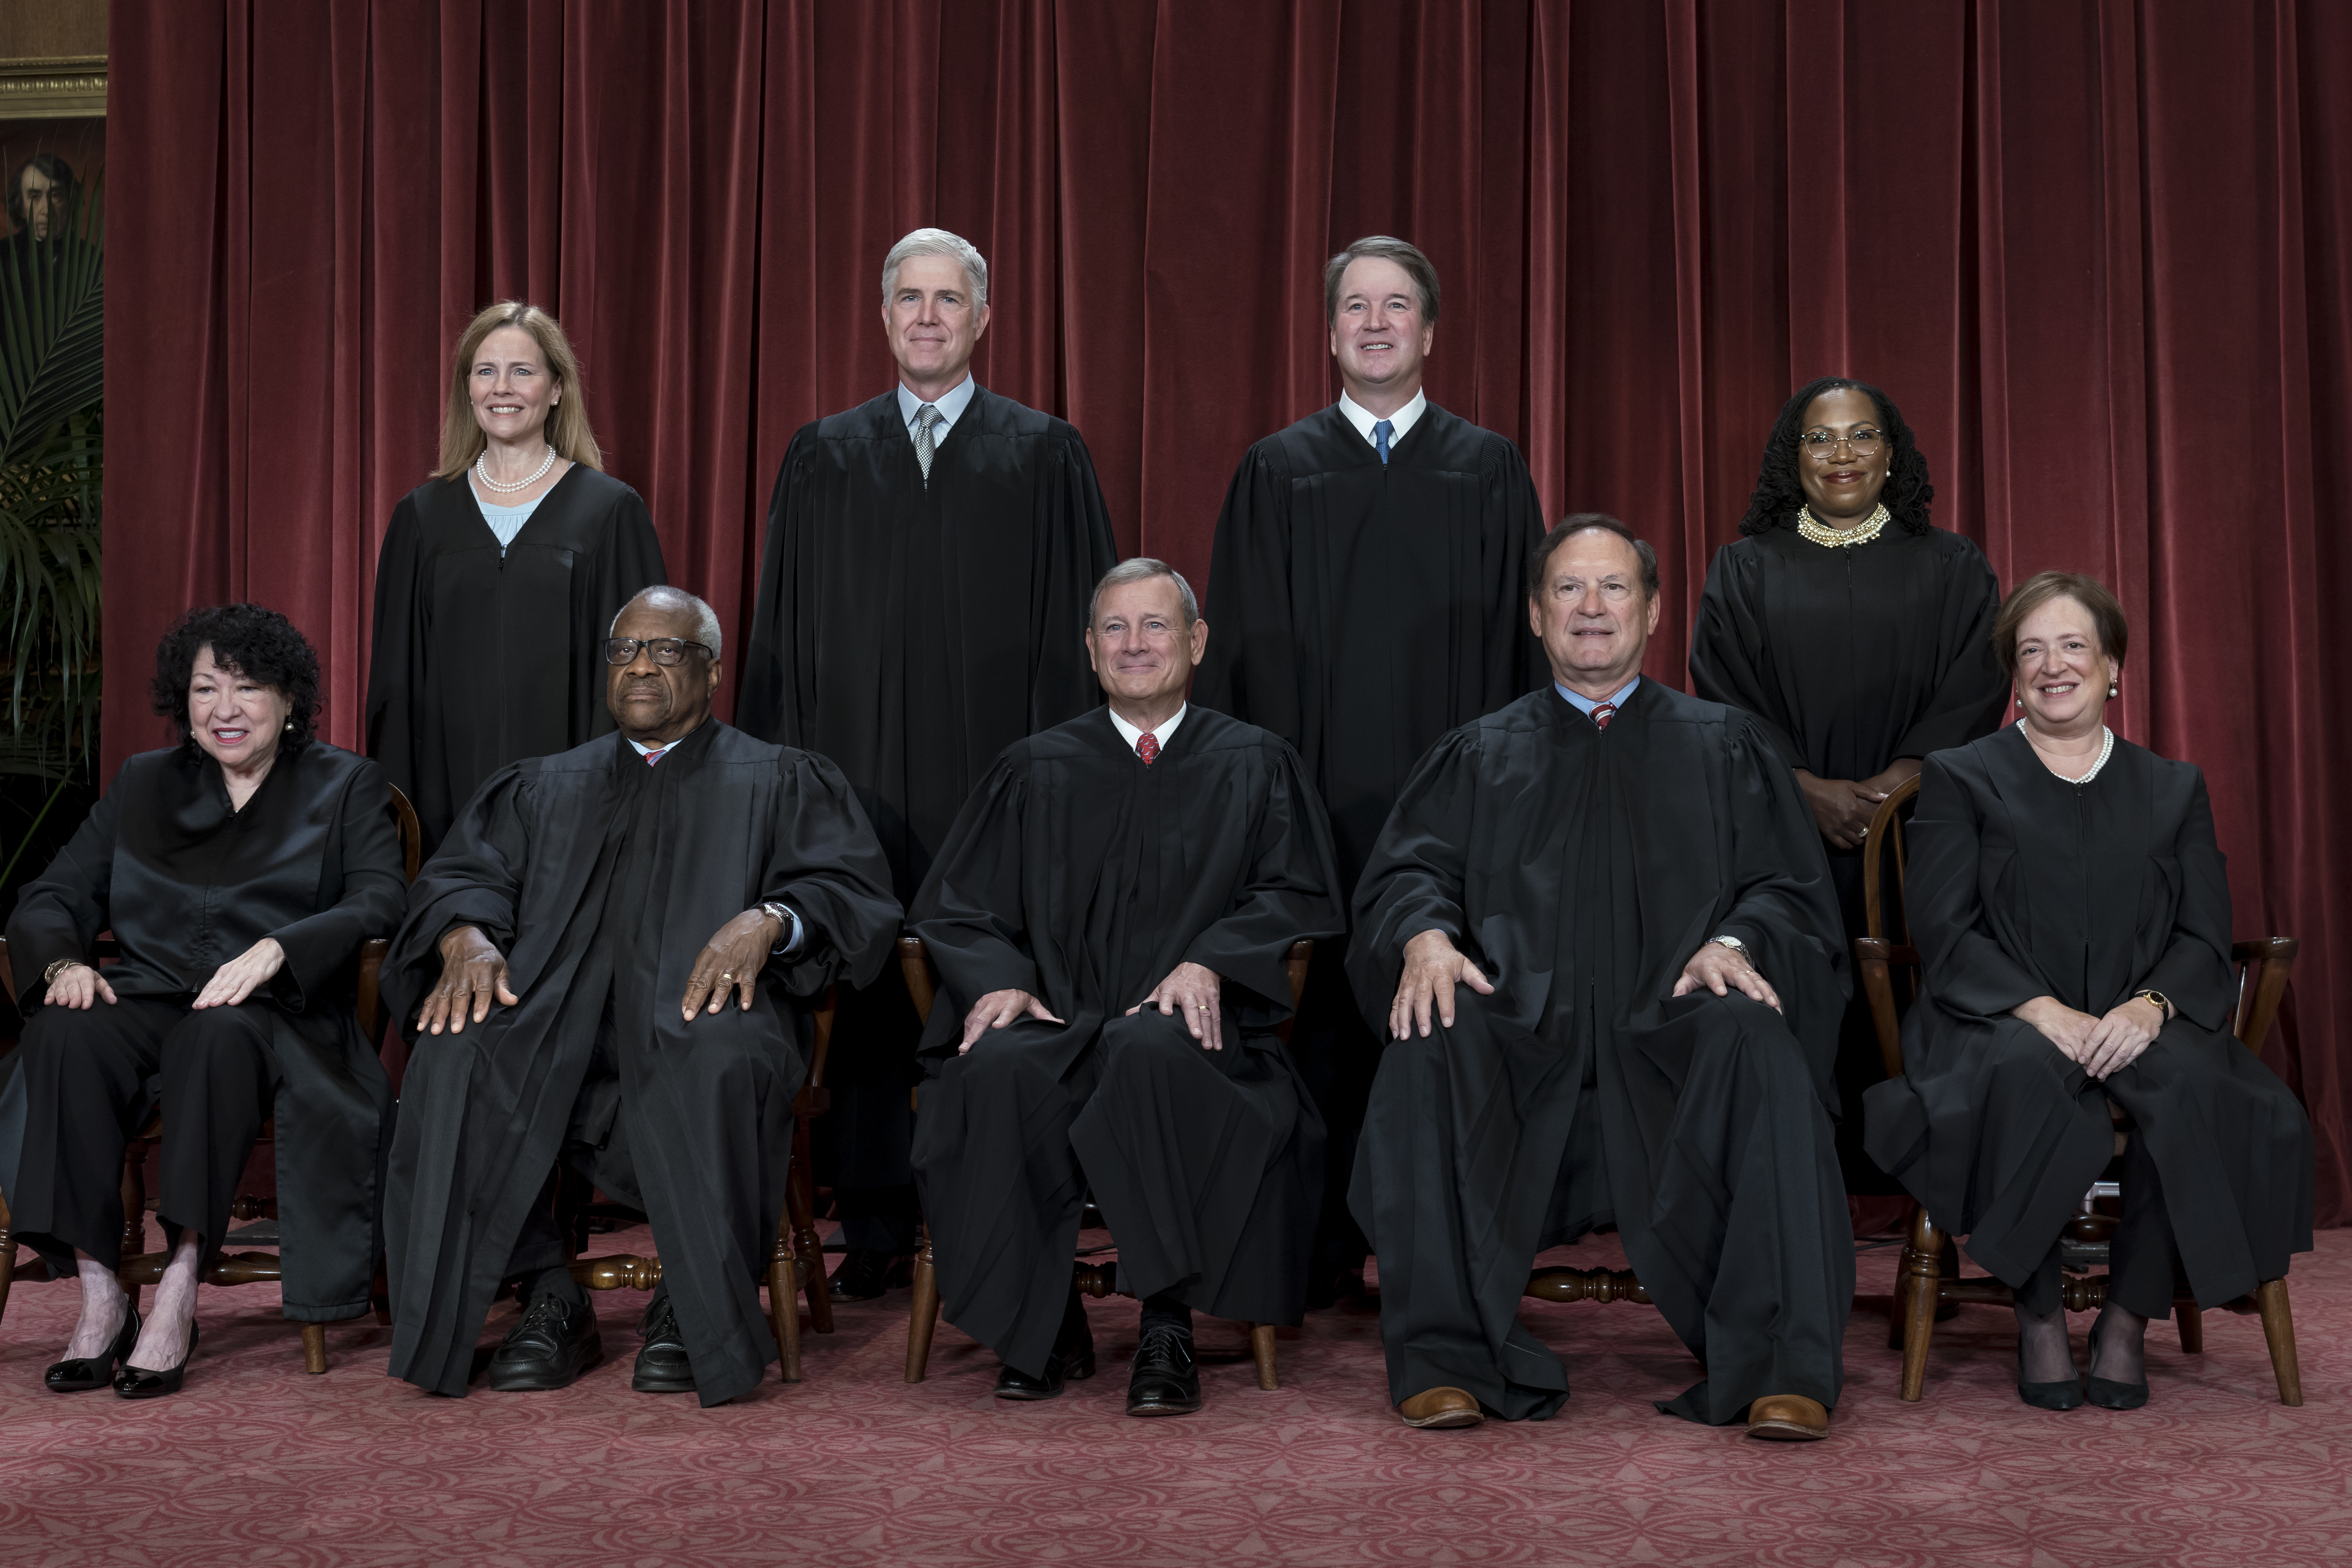 Members of the Supreme Court sit for a group portrait at the Supreme Court building in Washington, Oct. 7, 2022.